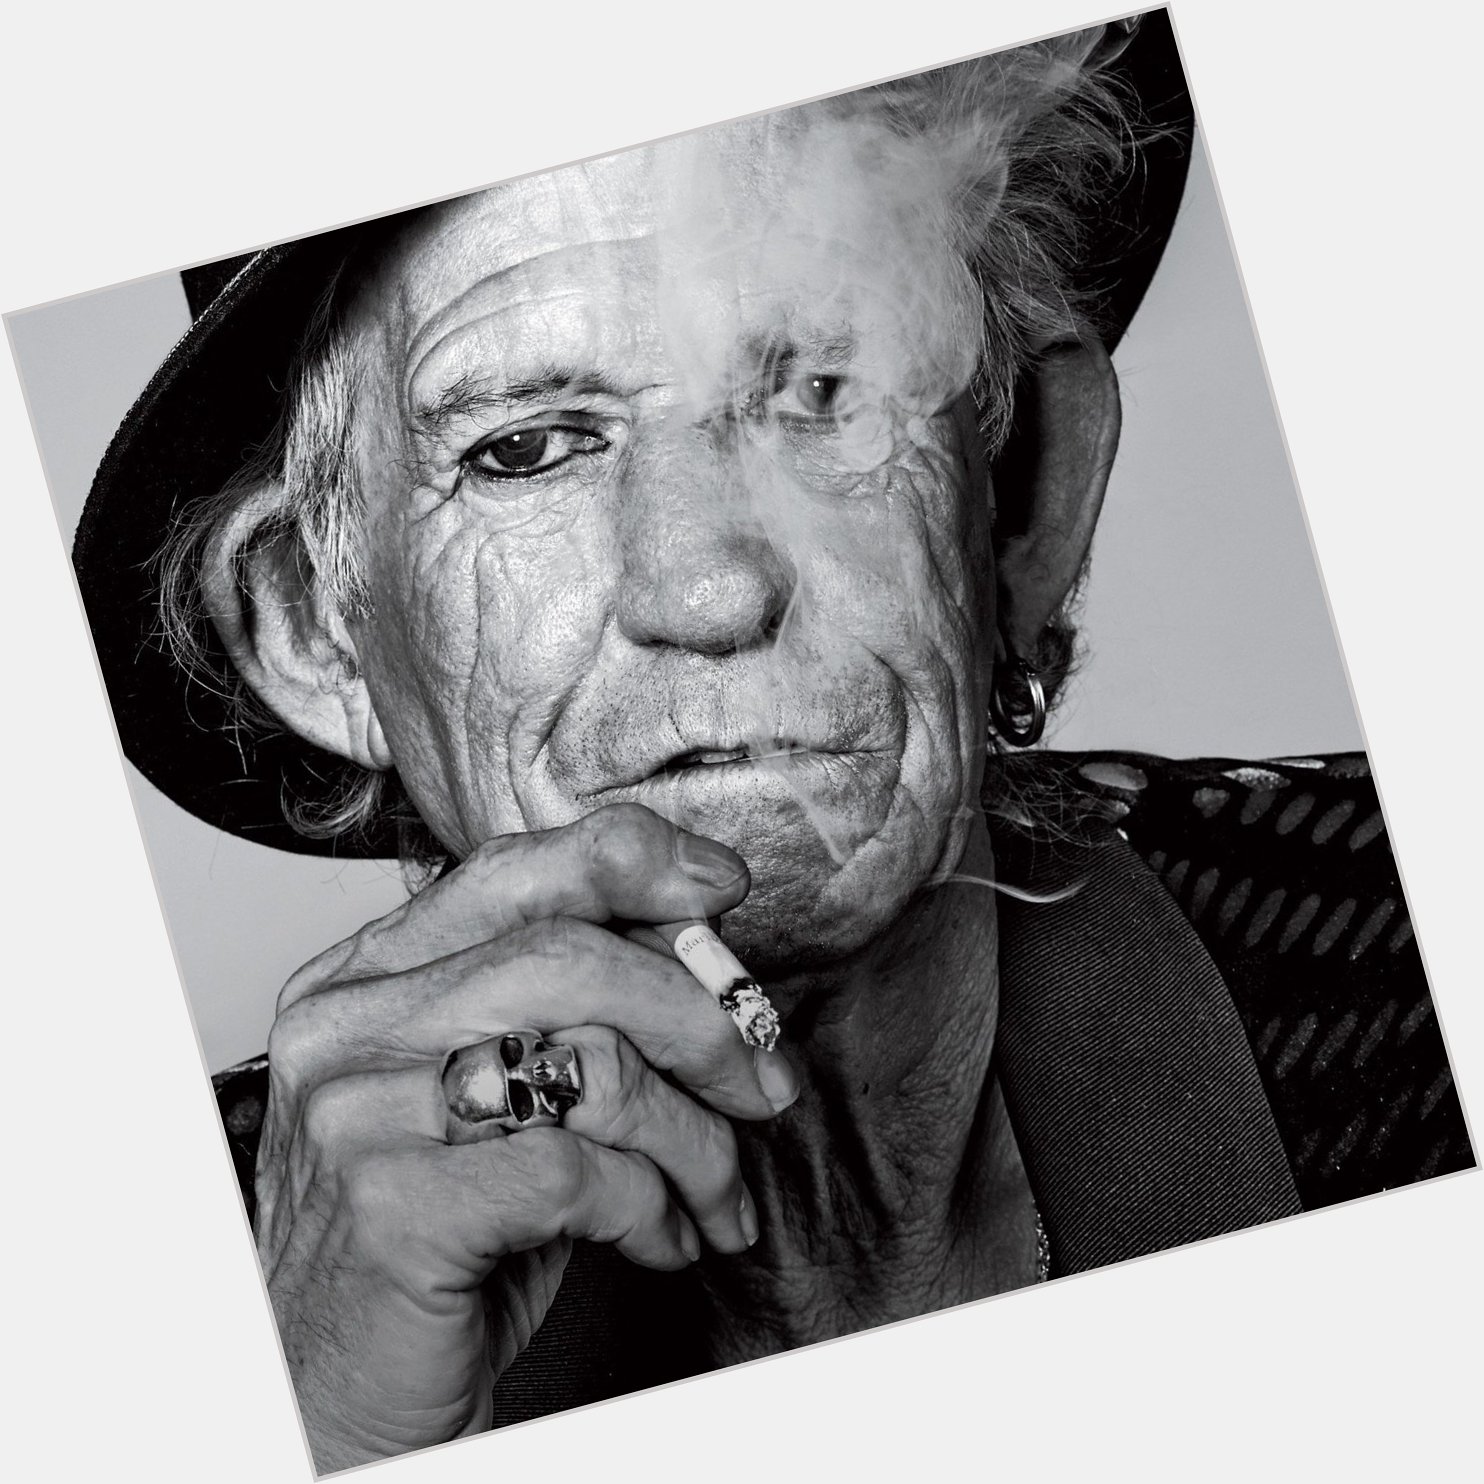 Happy Birthday to Rolling Stone Keith Richards, born December 18!
\"Gimme Shelter\"  